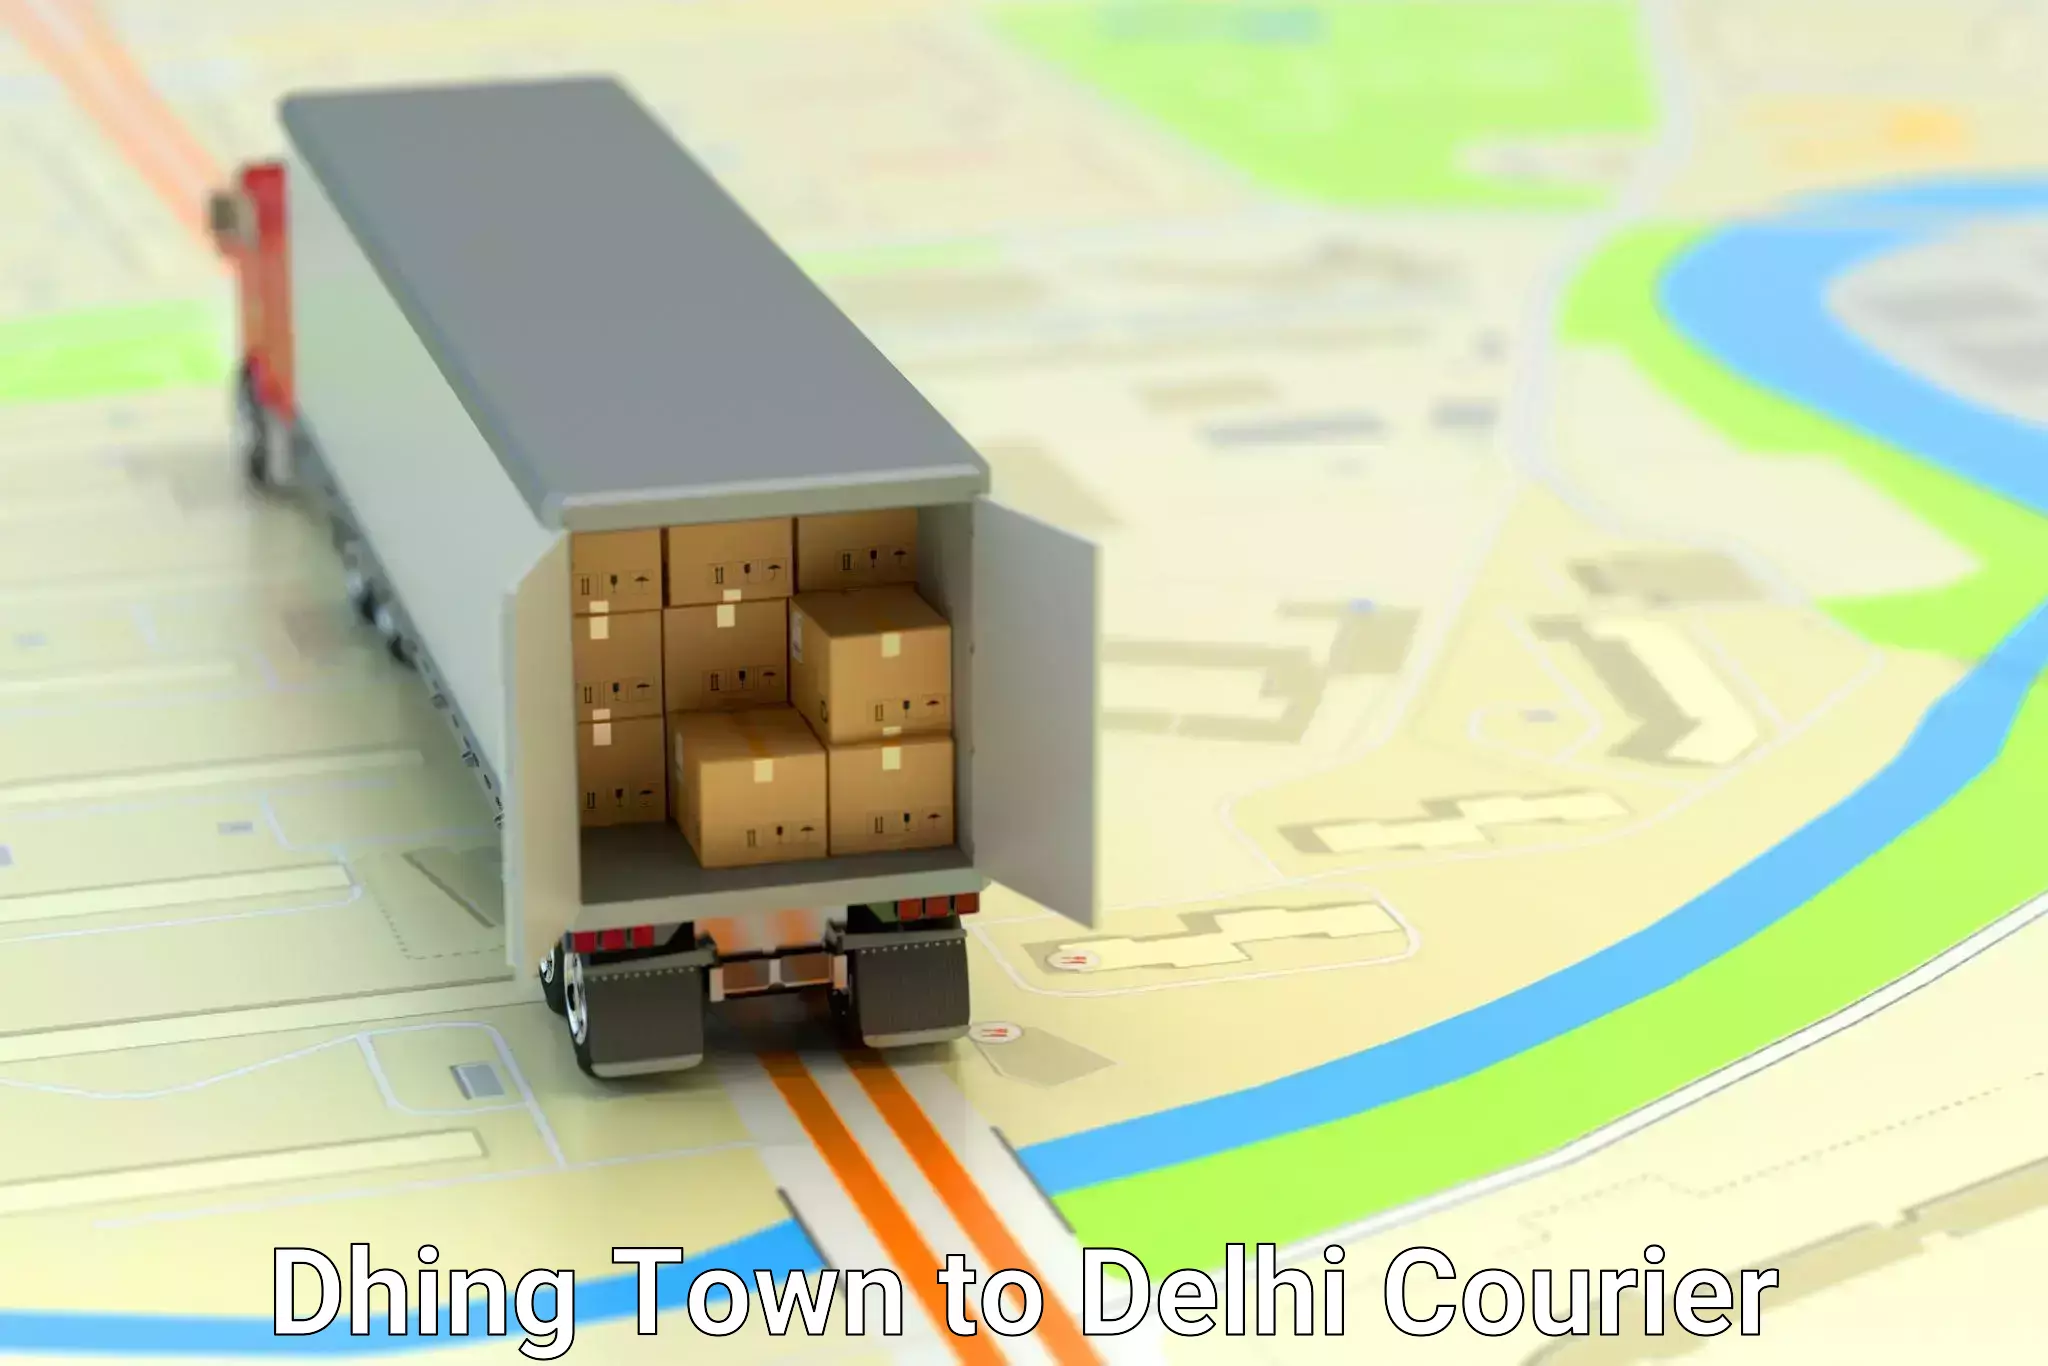 Multi-national courier services Dhing Town to NCR